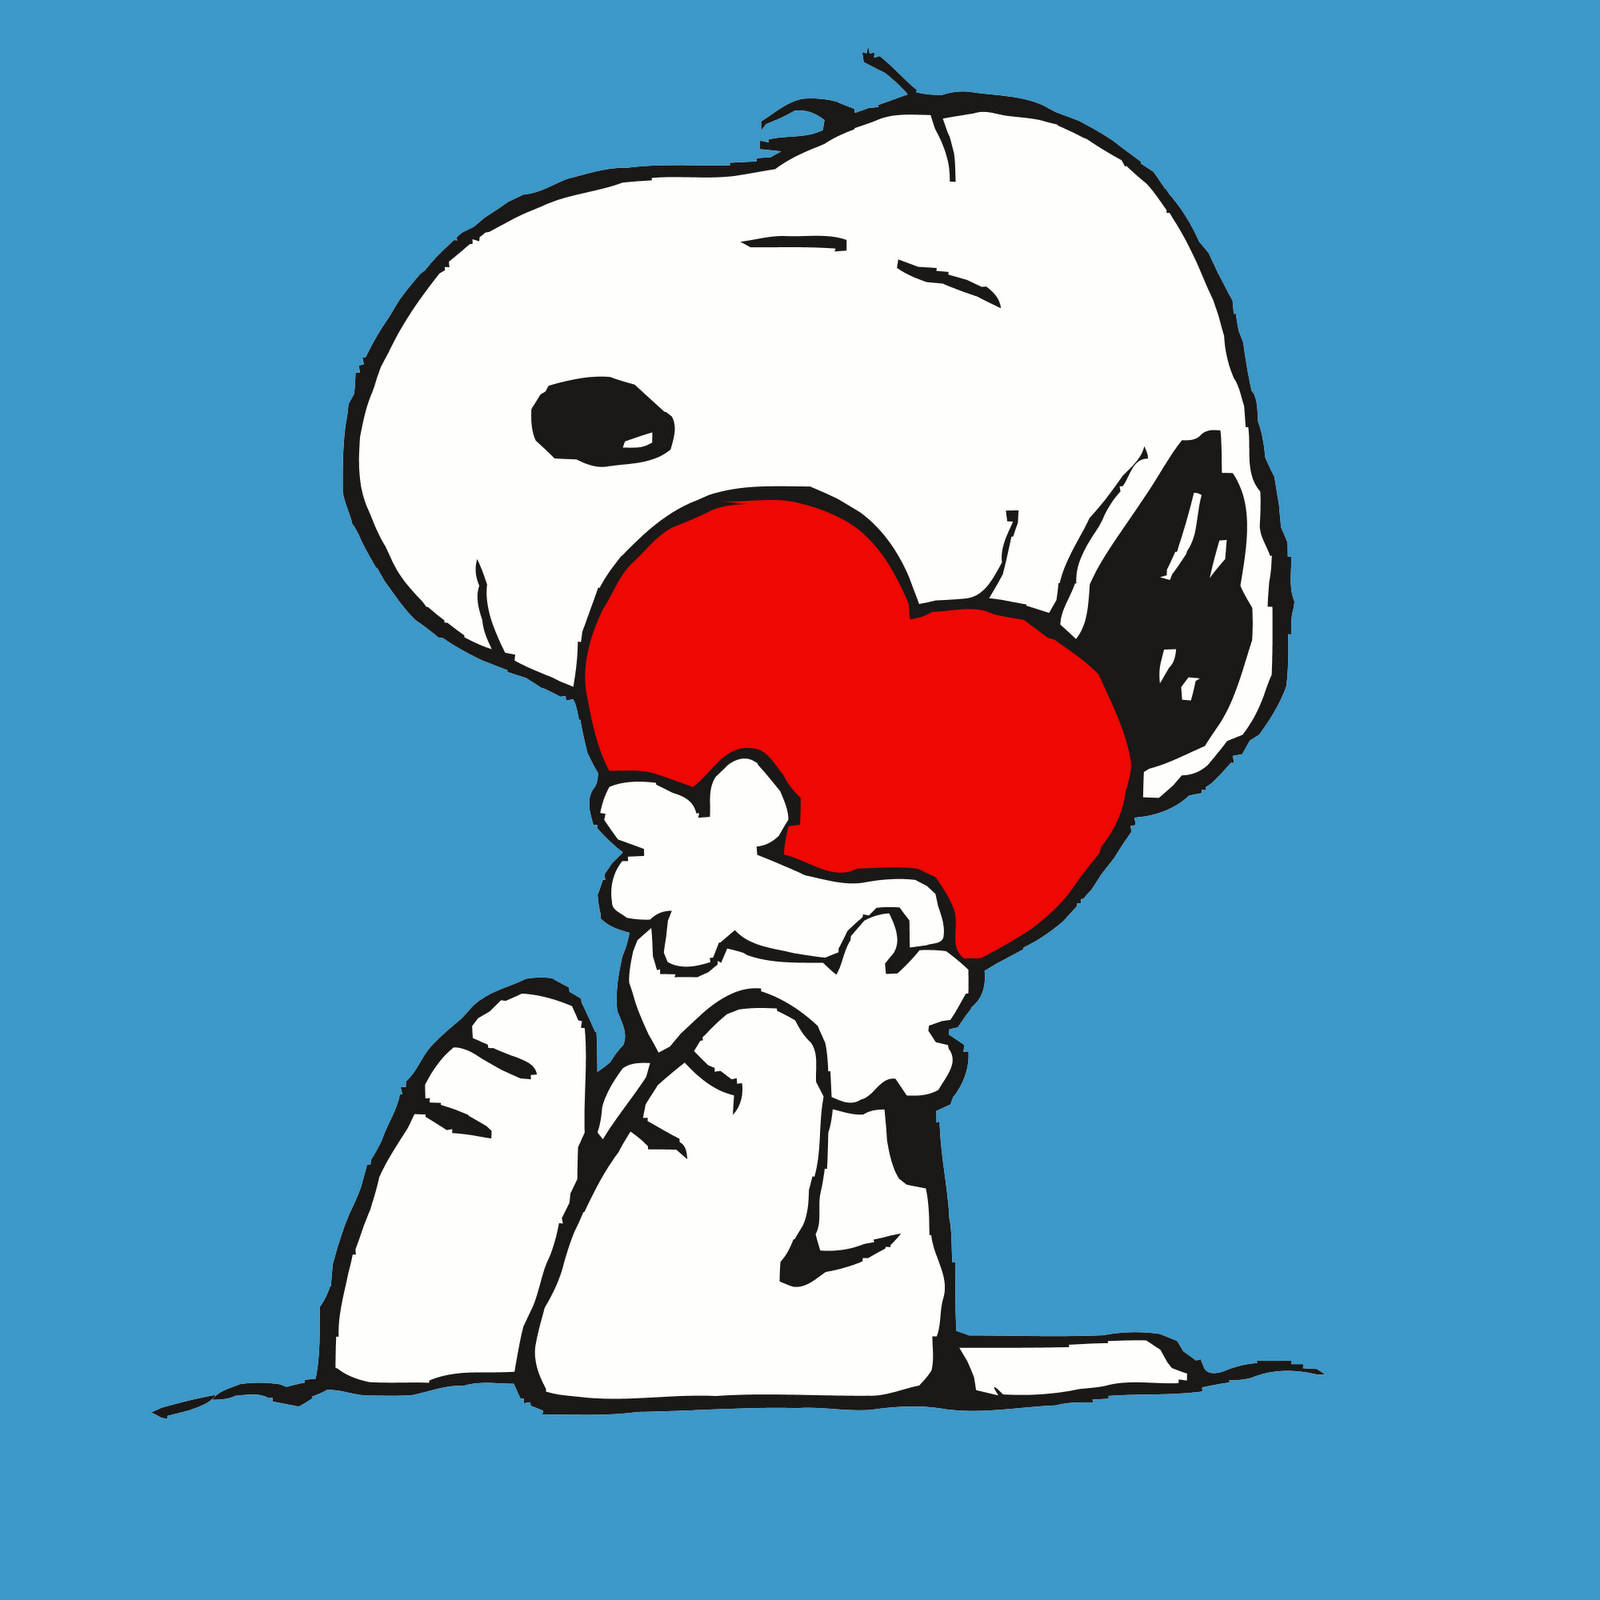 Download Snoopy Wallpaper